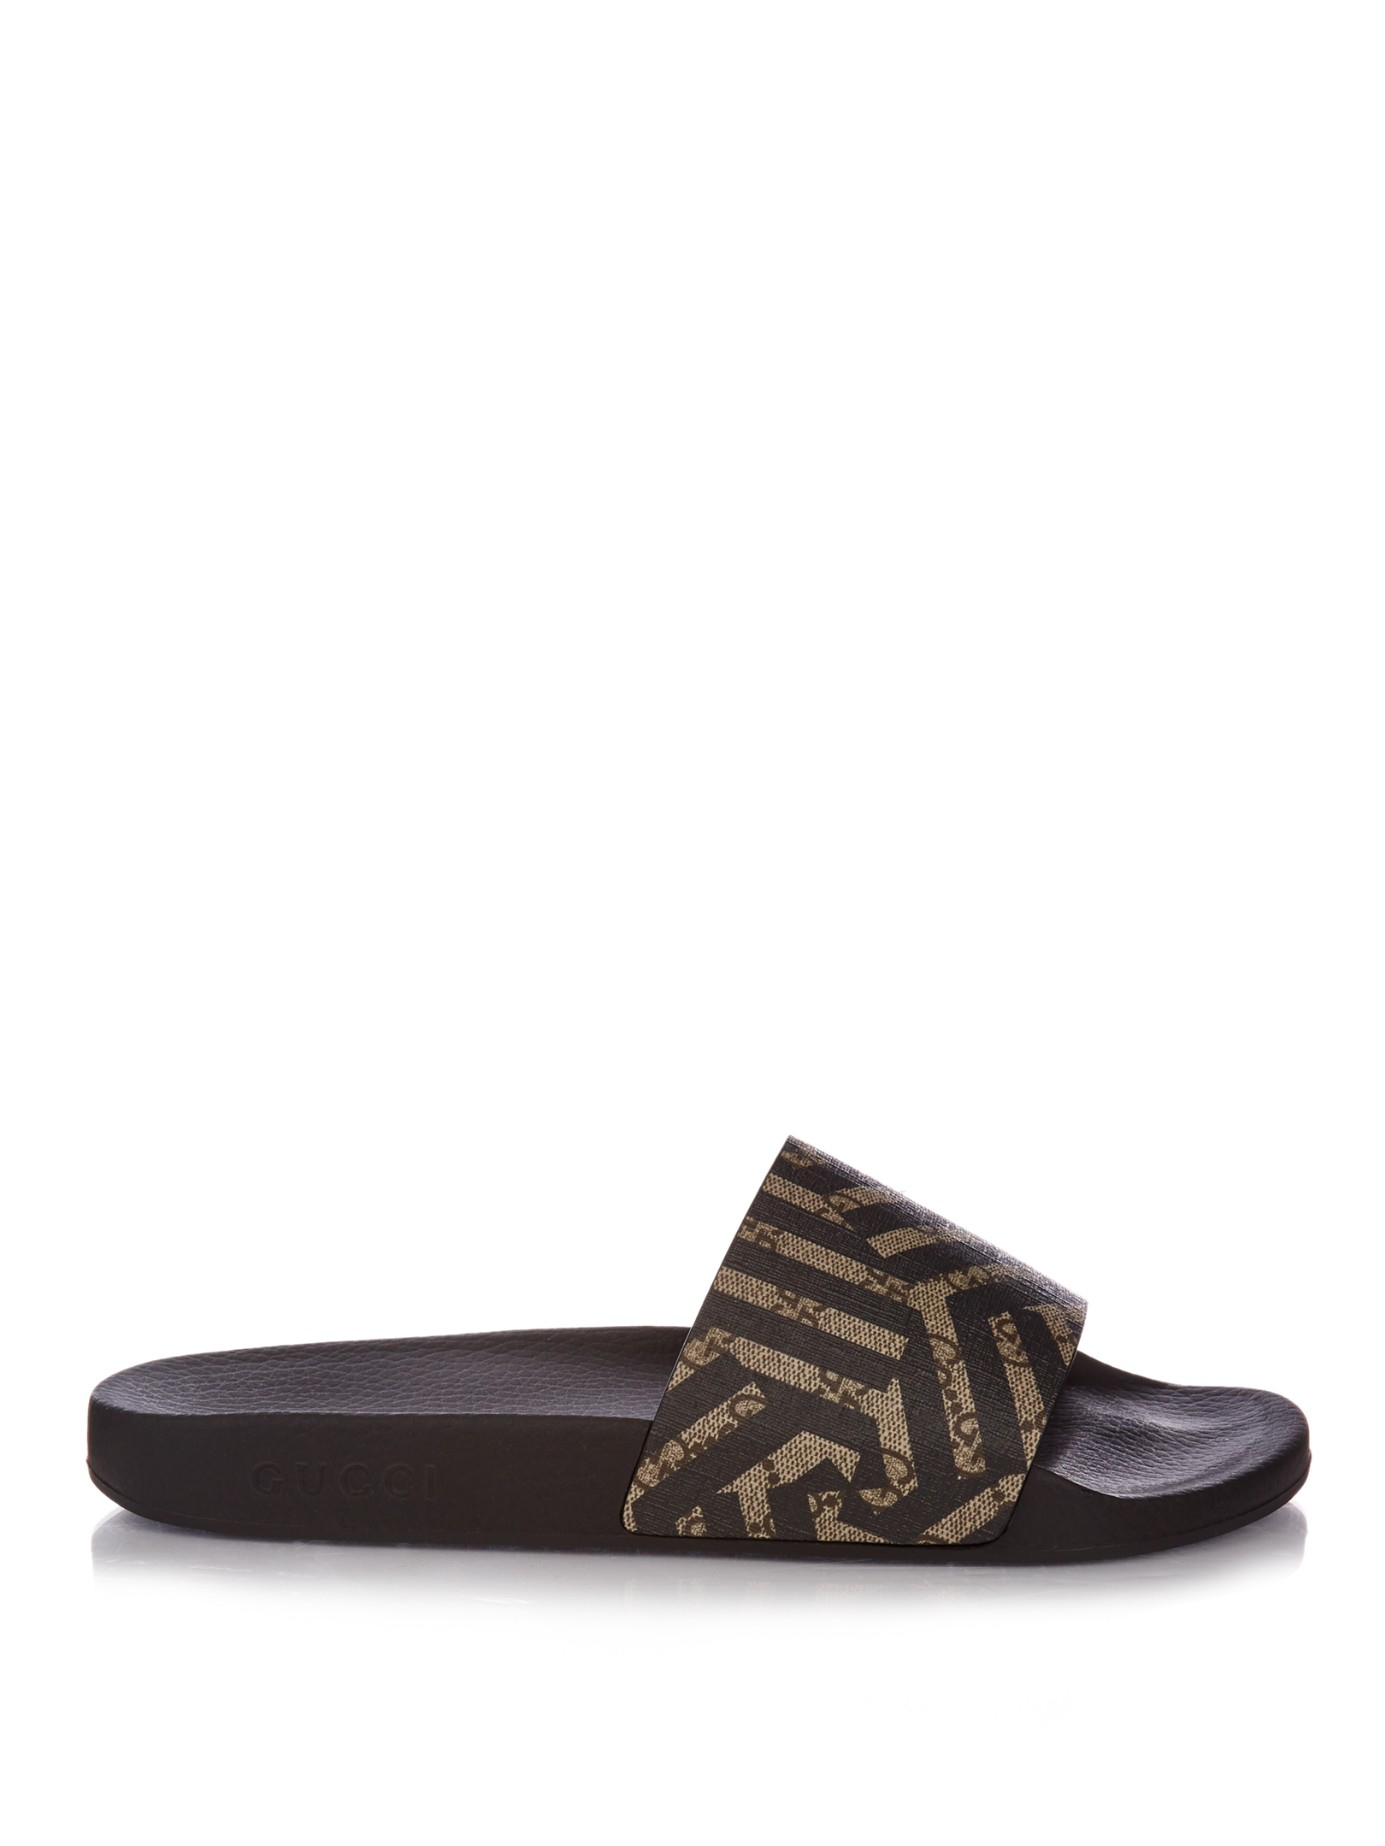 Lyst - Gucci Caleido-print Pool Slides in Brown for Men